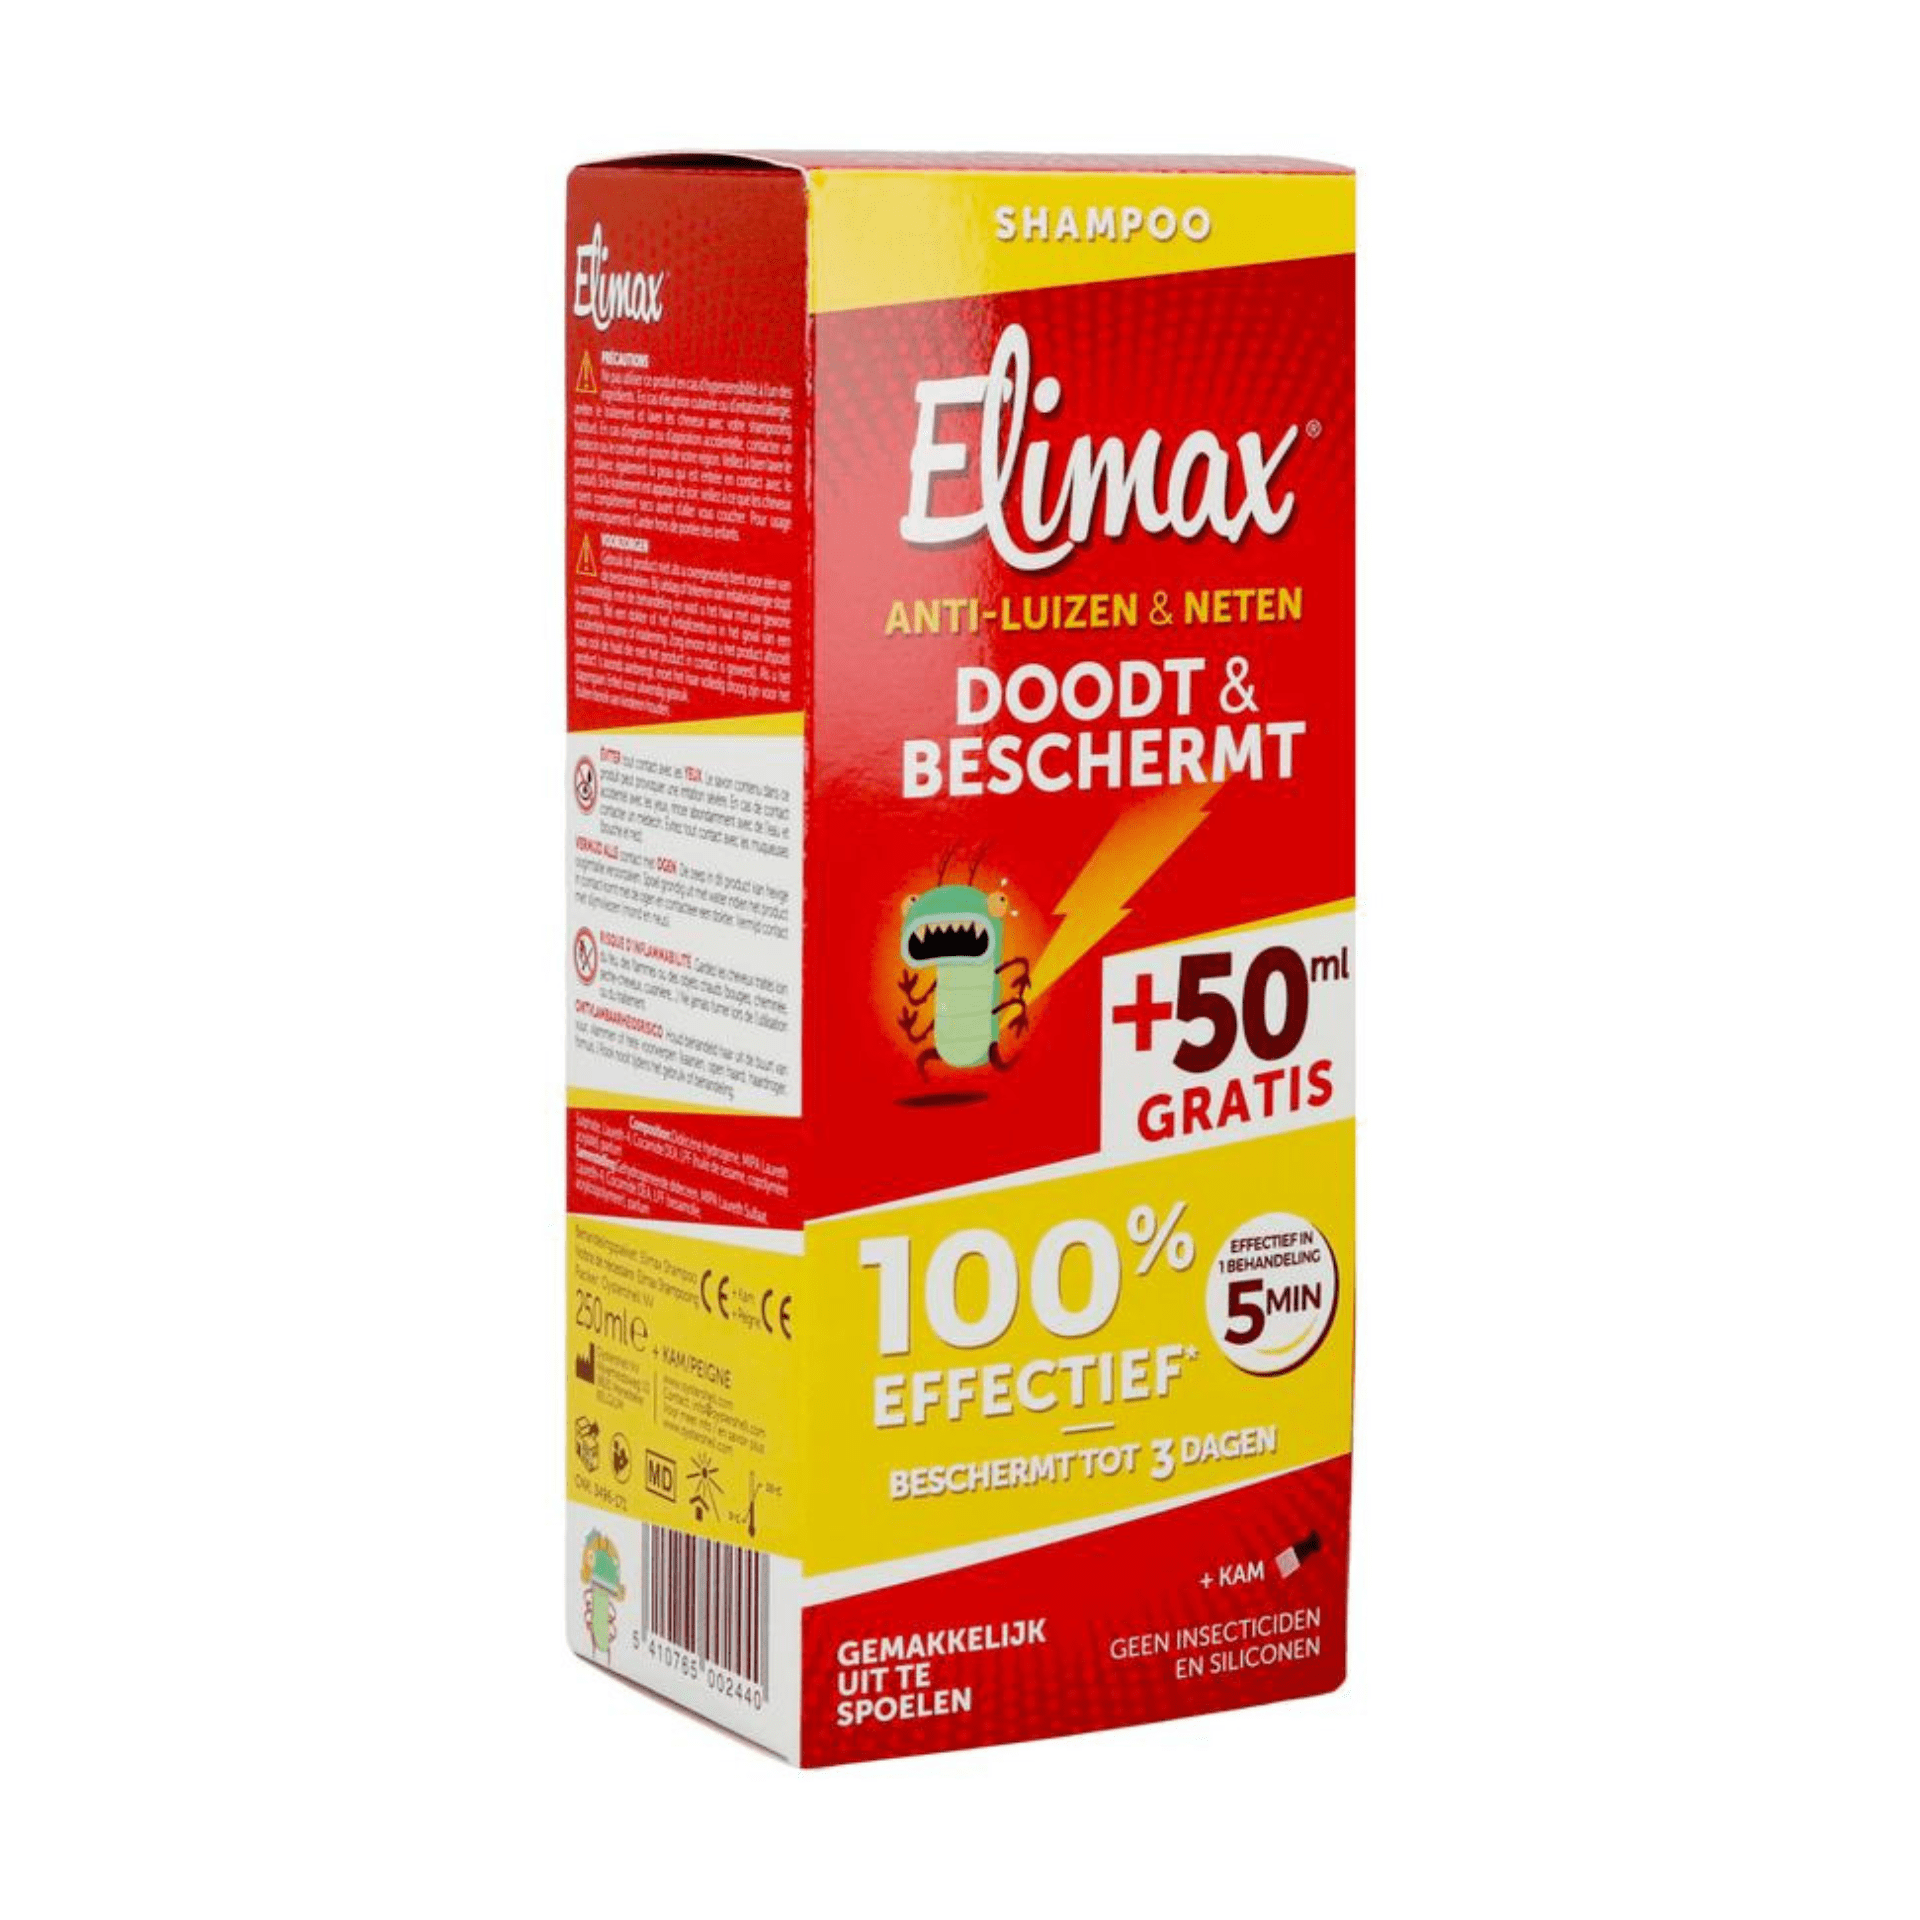 Elimax 2-in-1 Shampooing